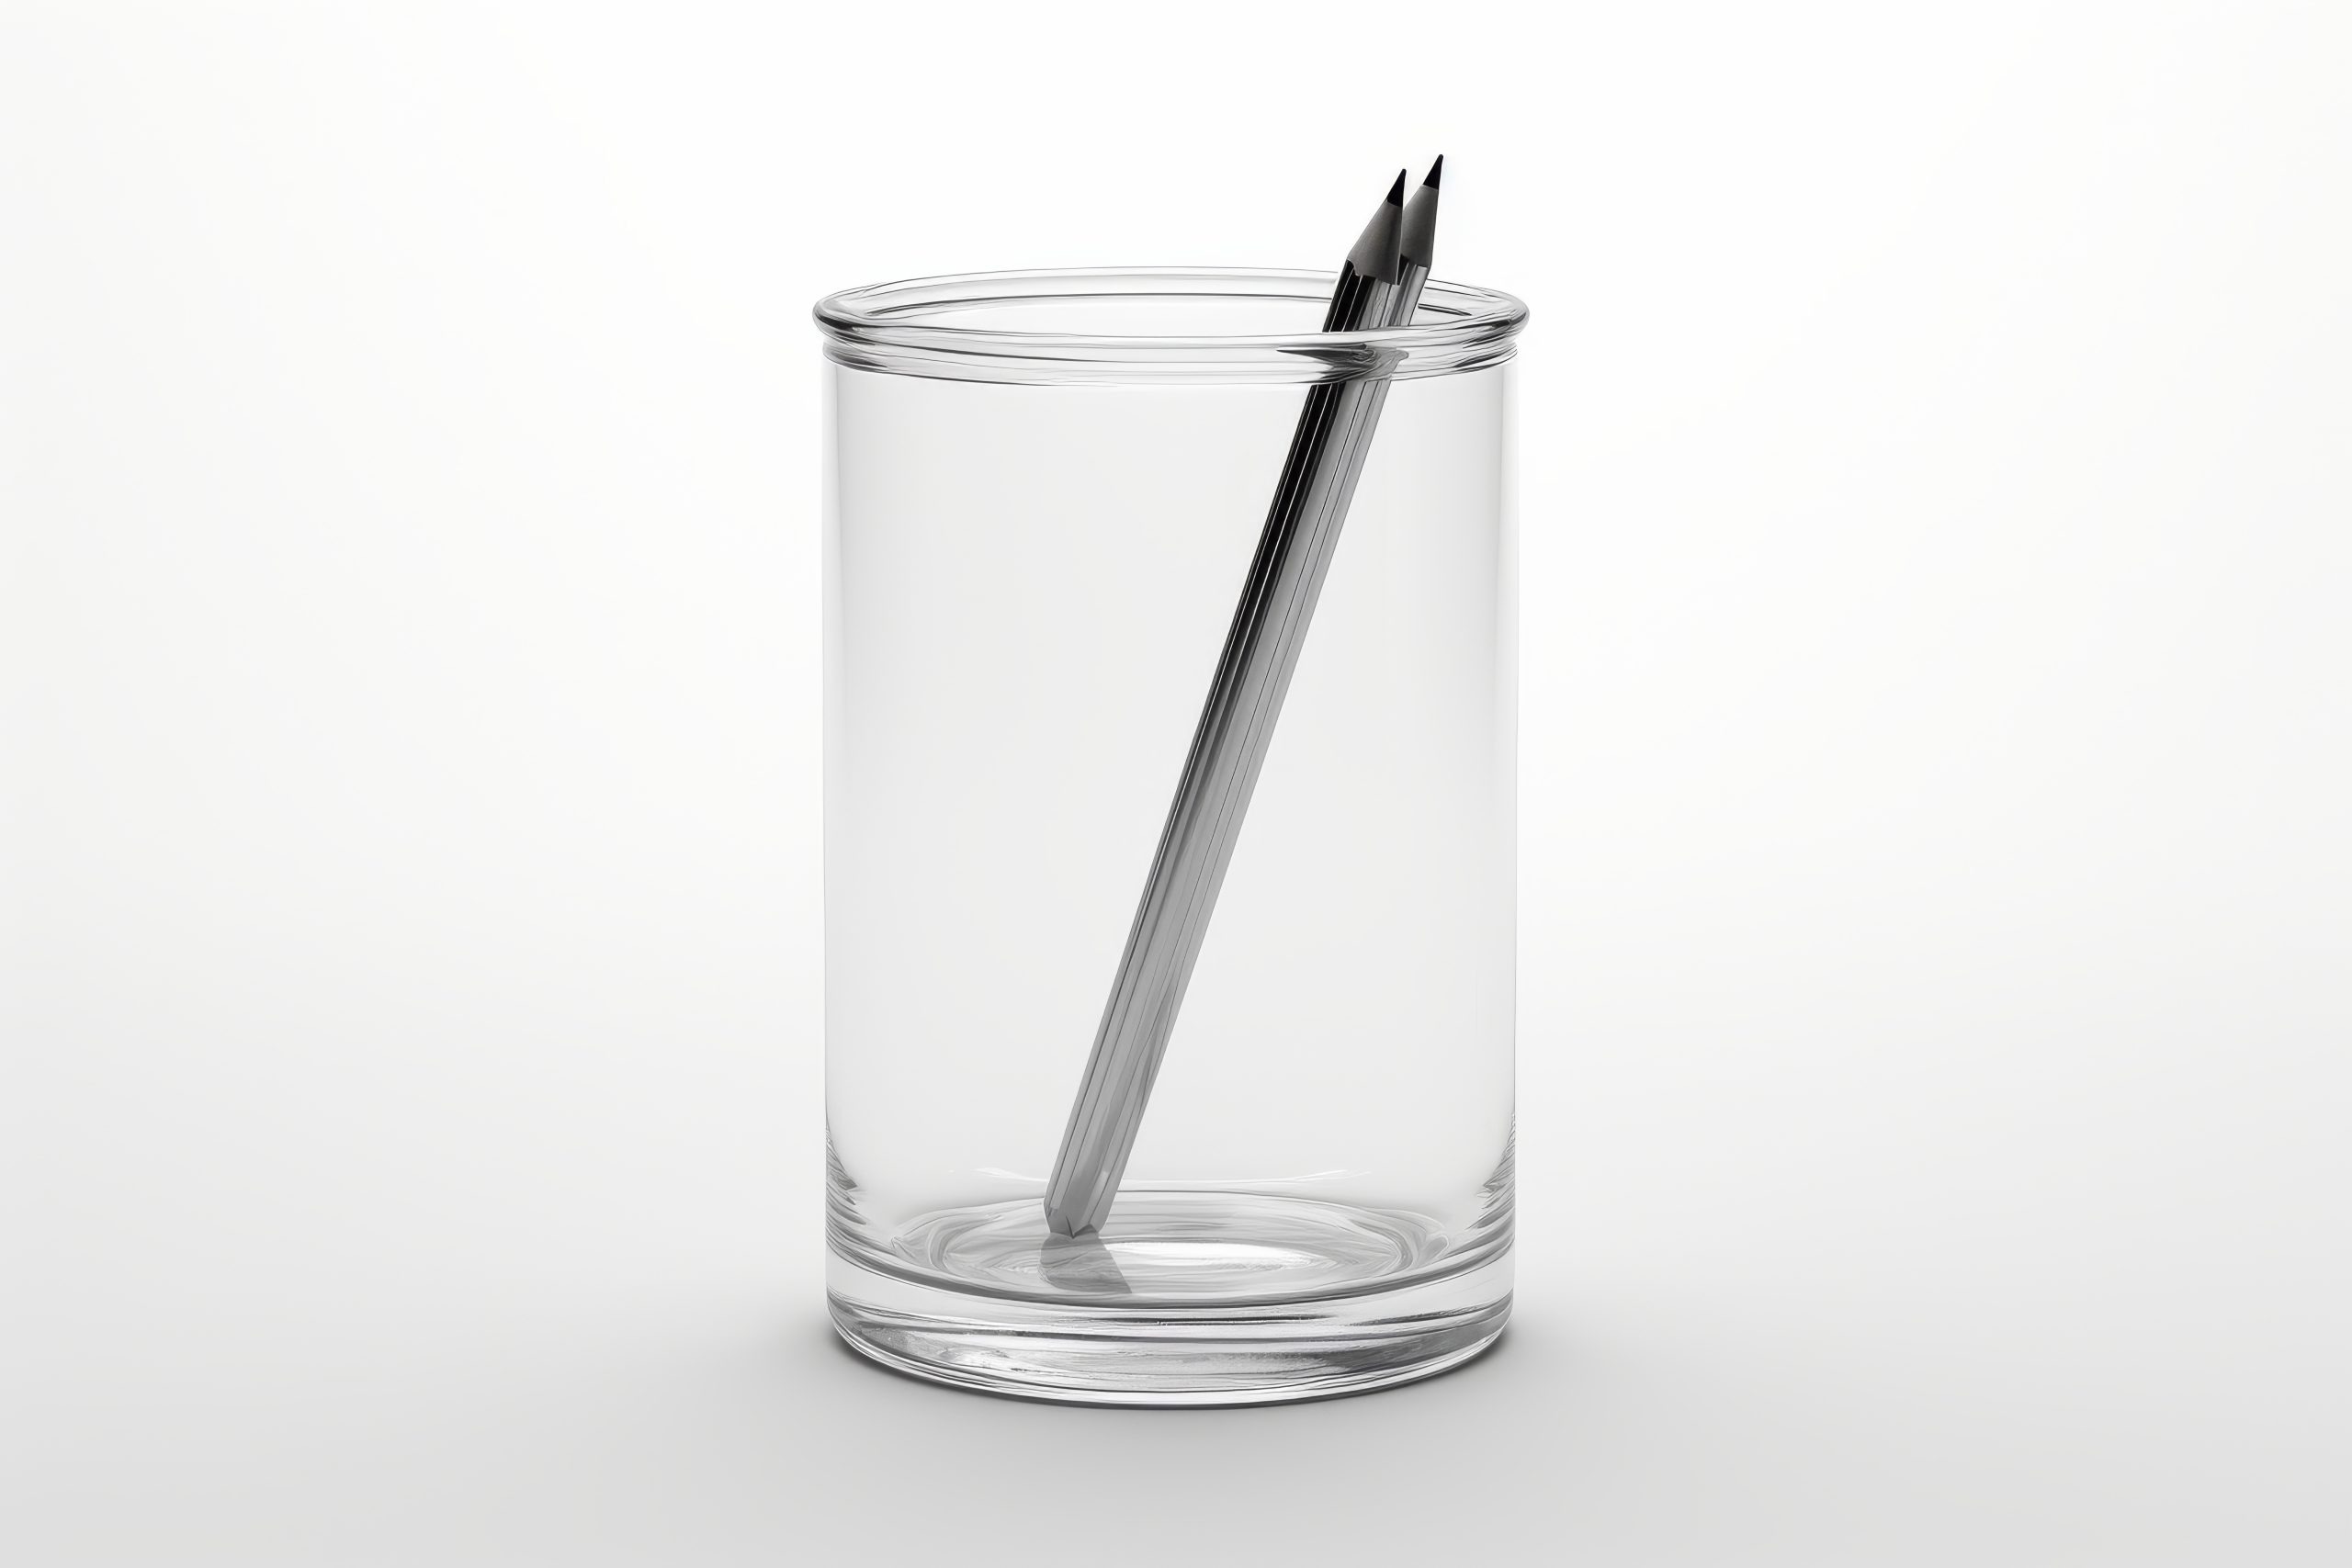 Pencil inserted in a Glass of Water